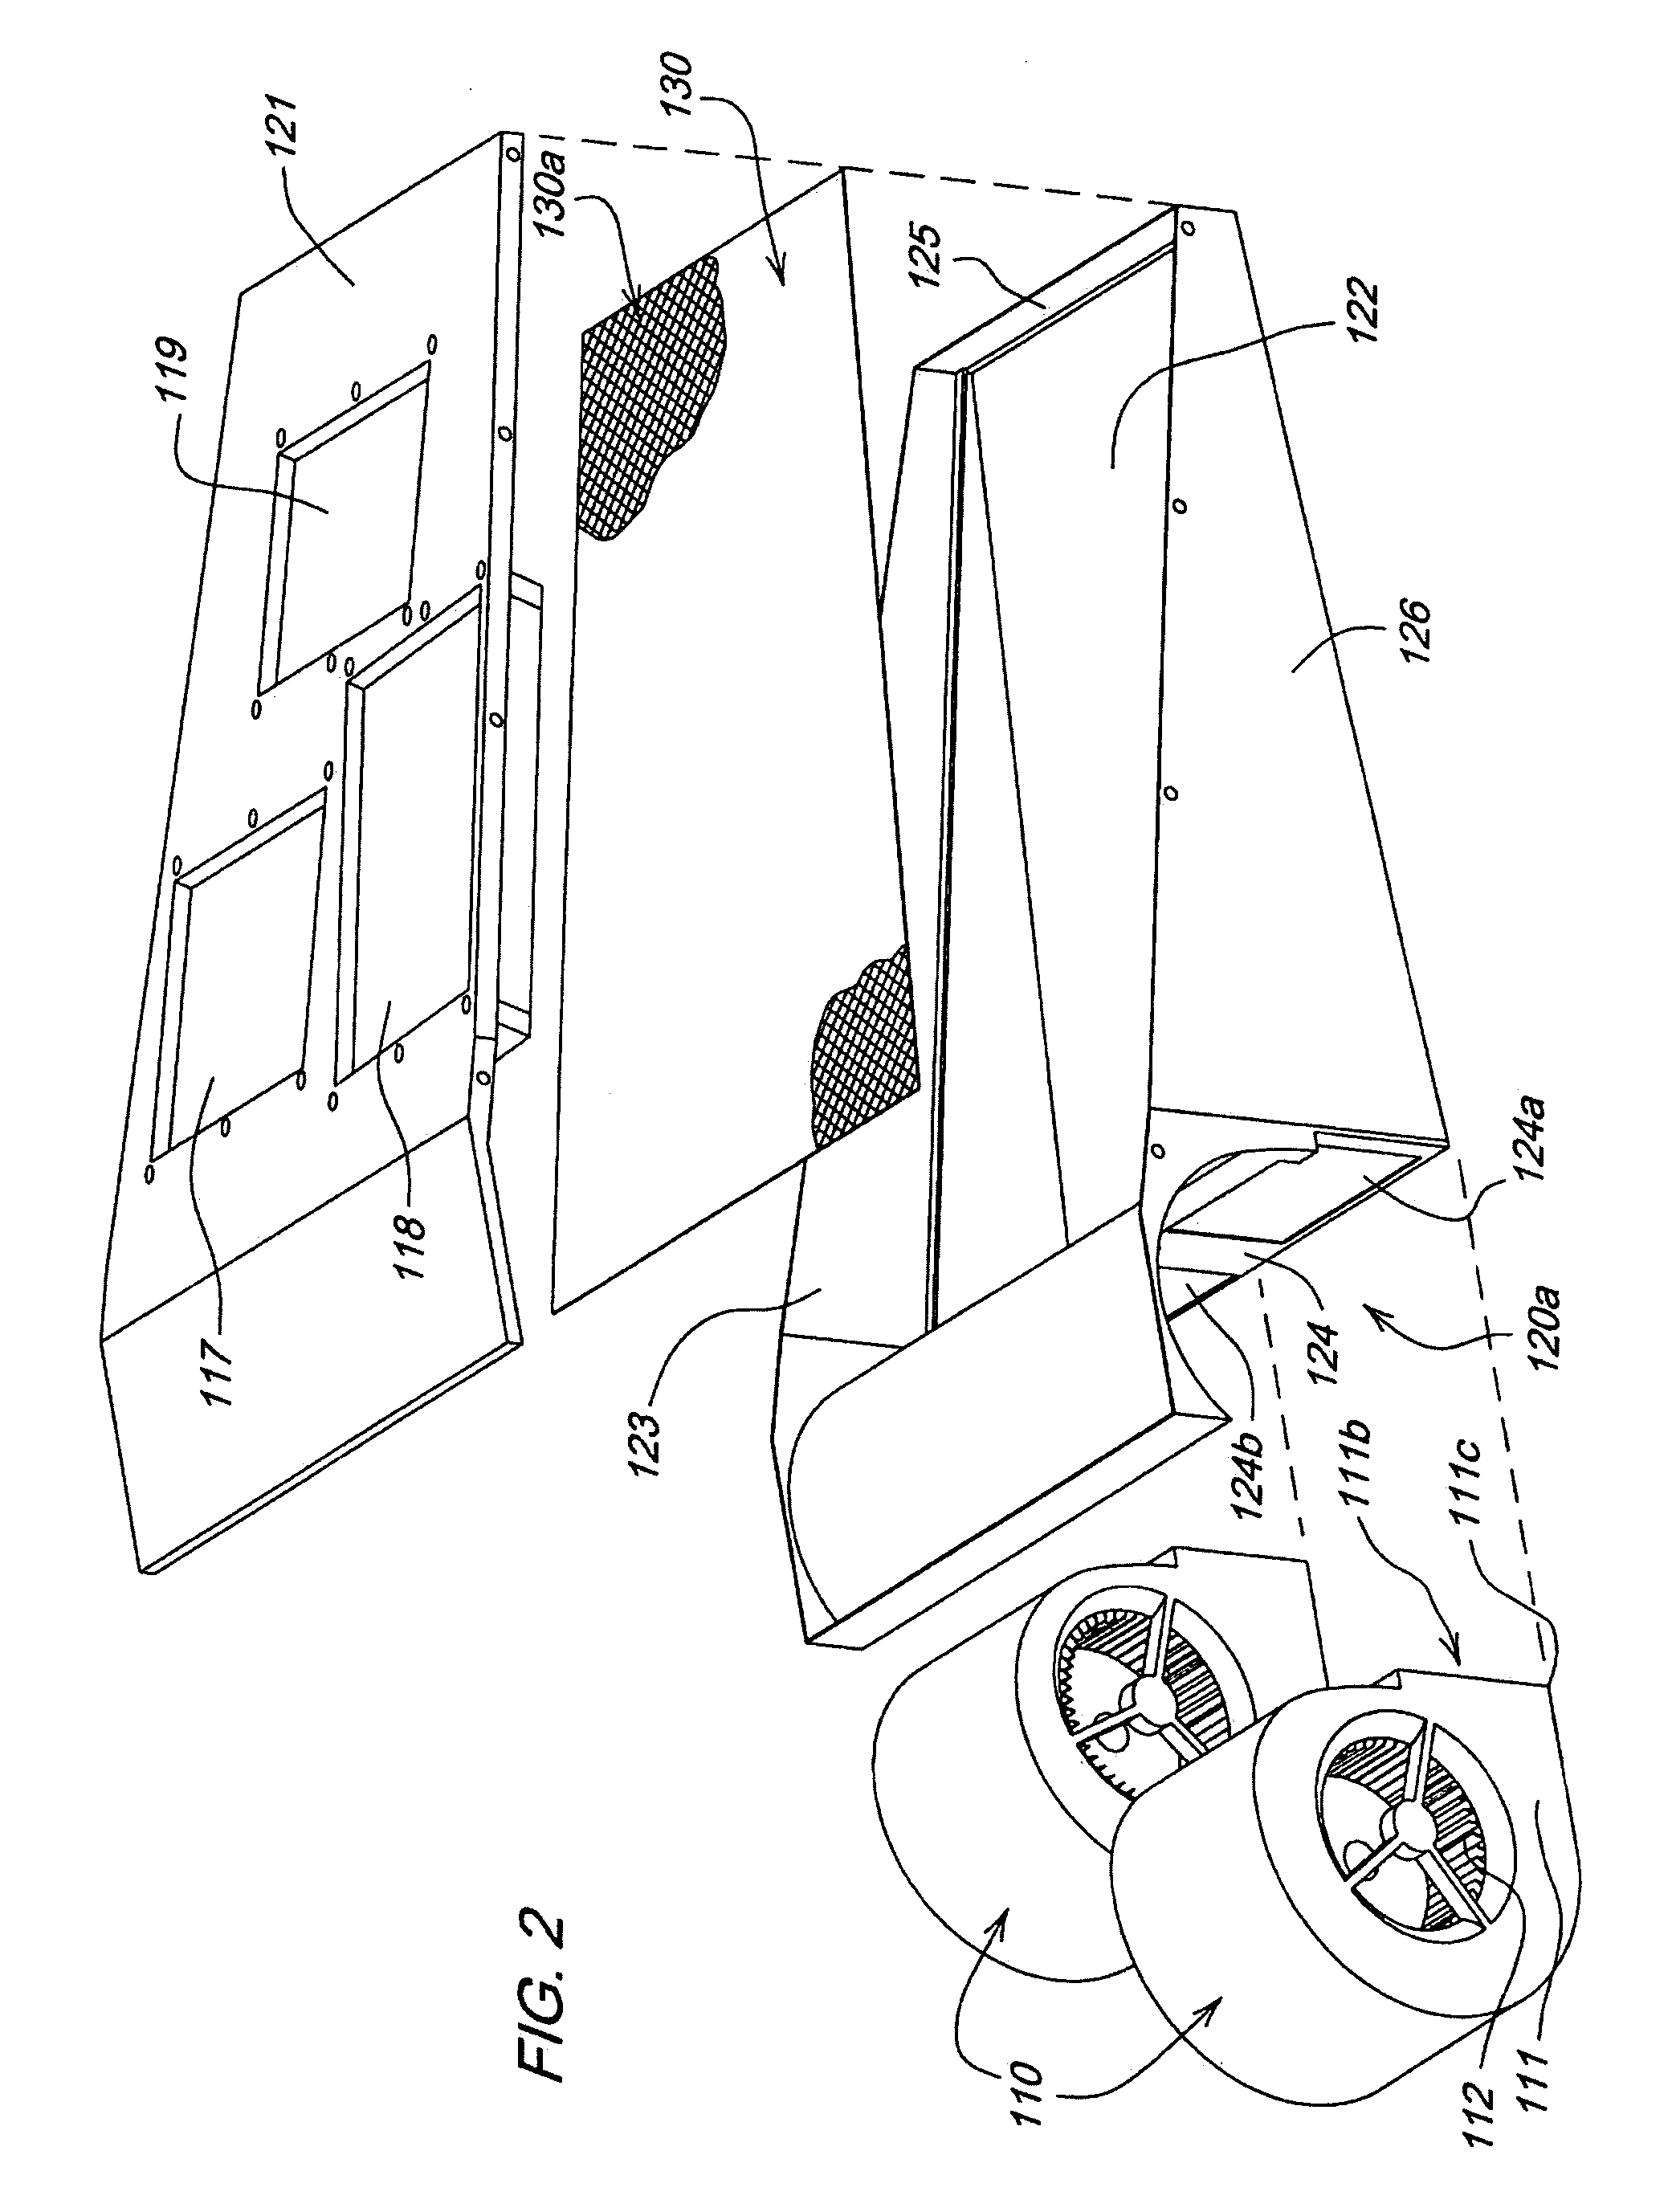 Cooling system with active debris separation